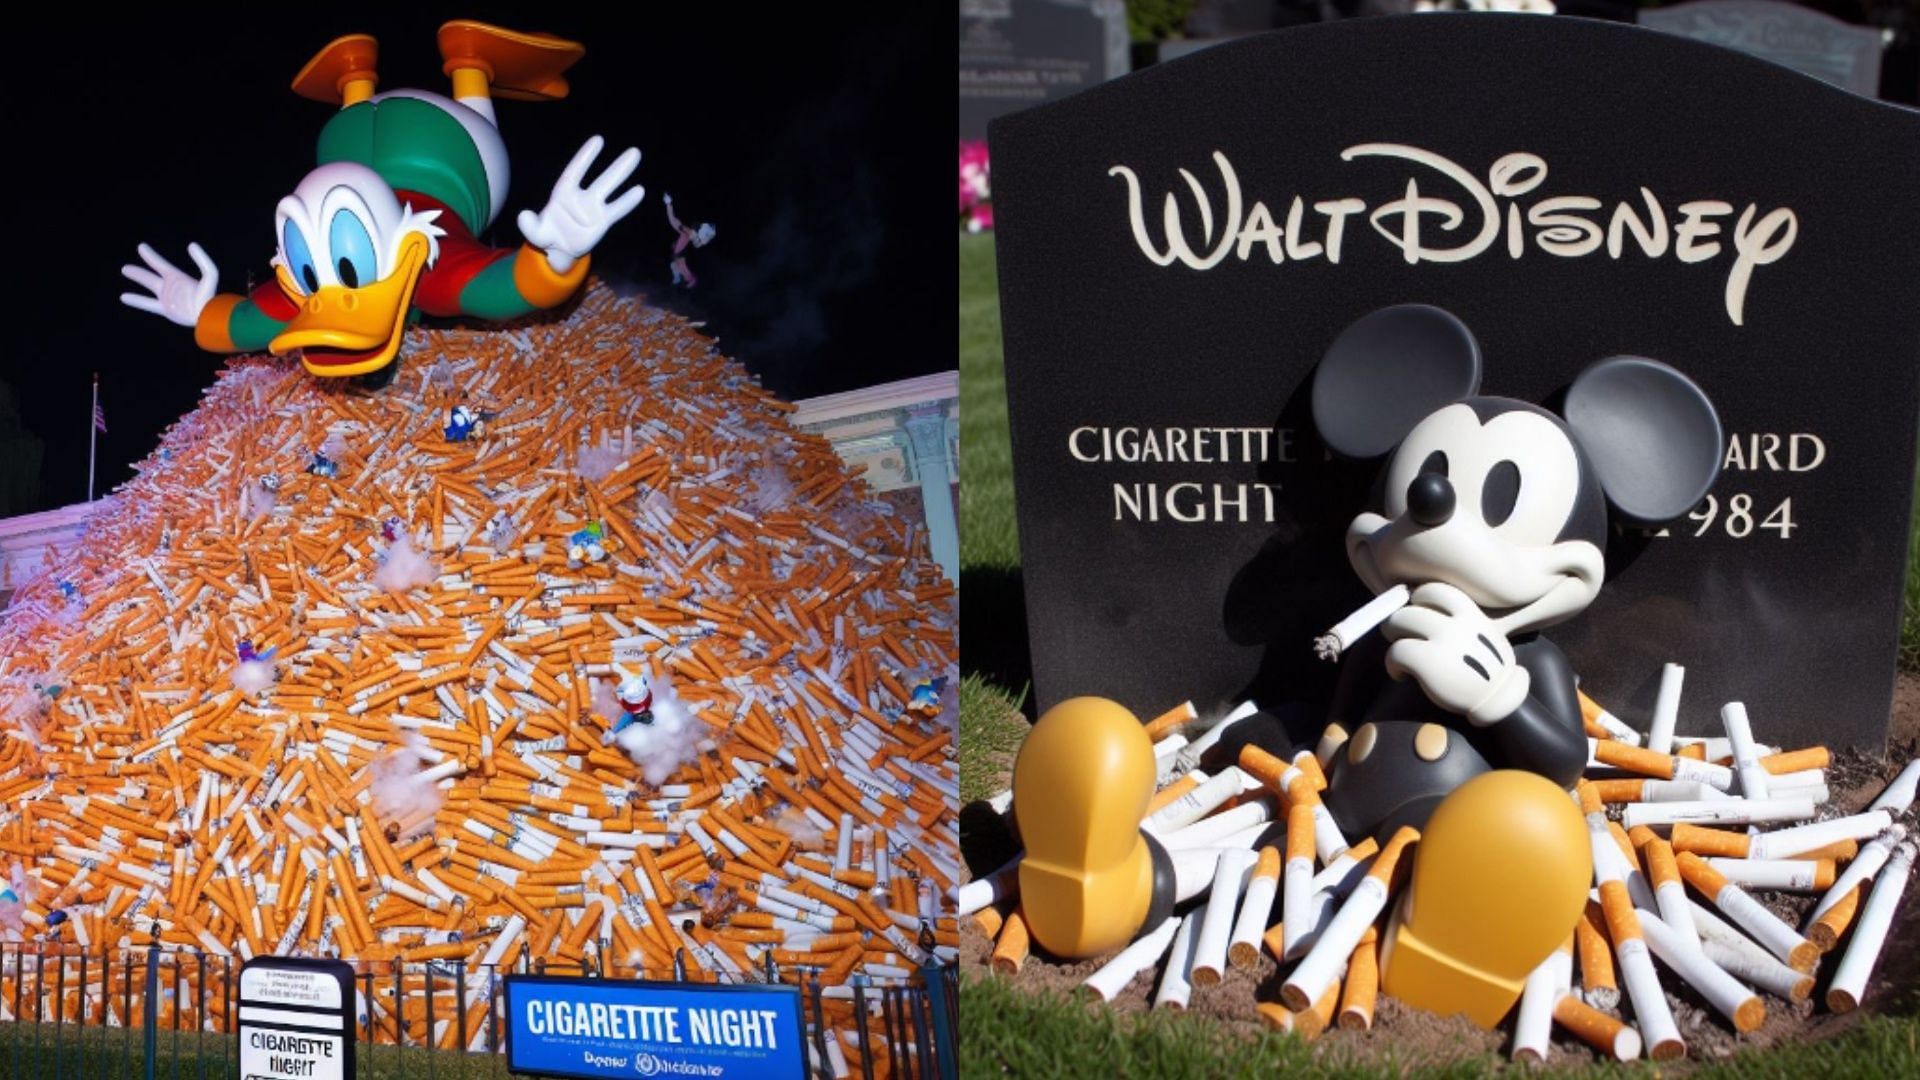 Disneyland Cigarette Night pictures are not real but AI-generated. (Image via X/ShutupAndrosky)